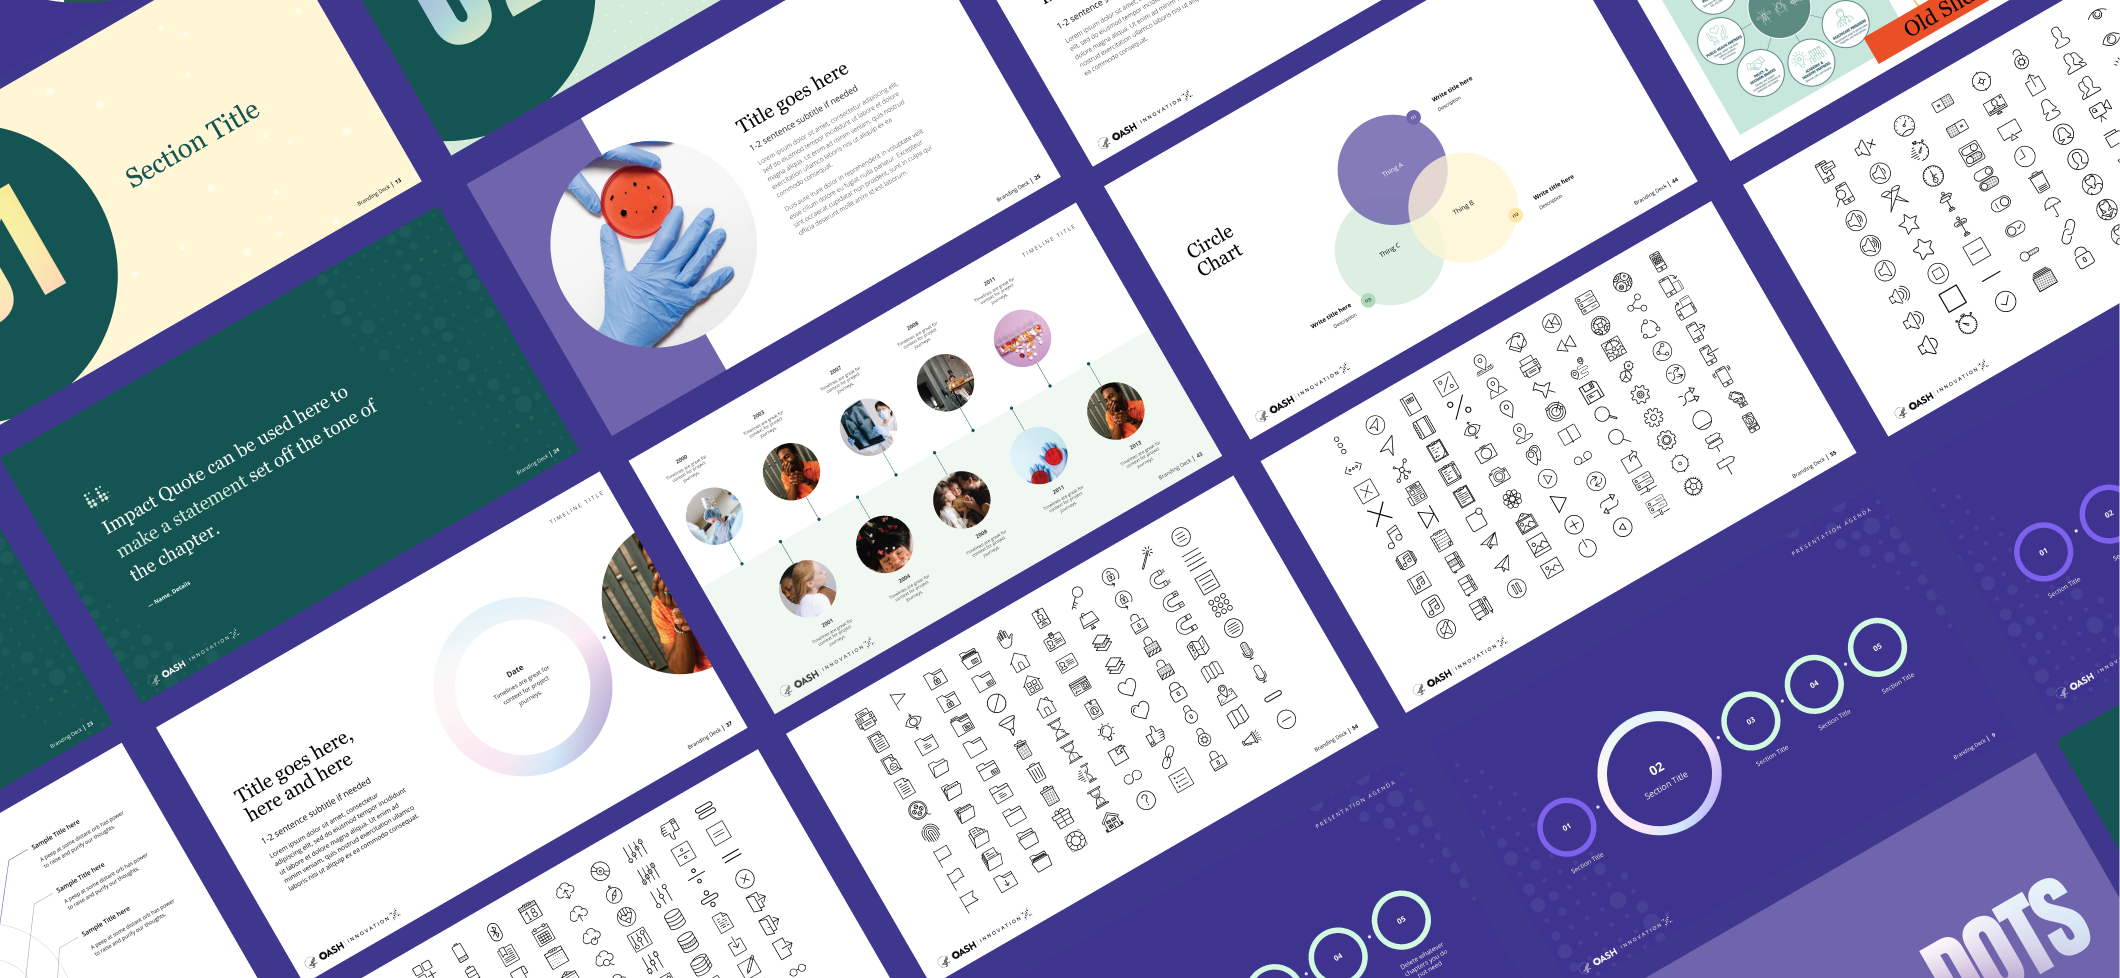 A colorful branded presentation template is shown in a 30 degree angled grid pattern.